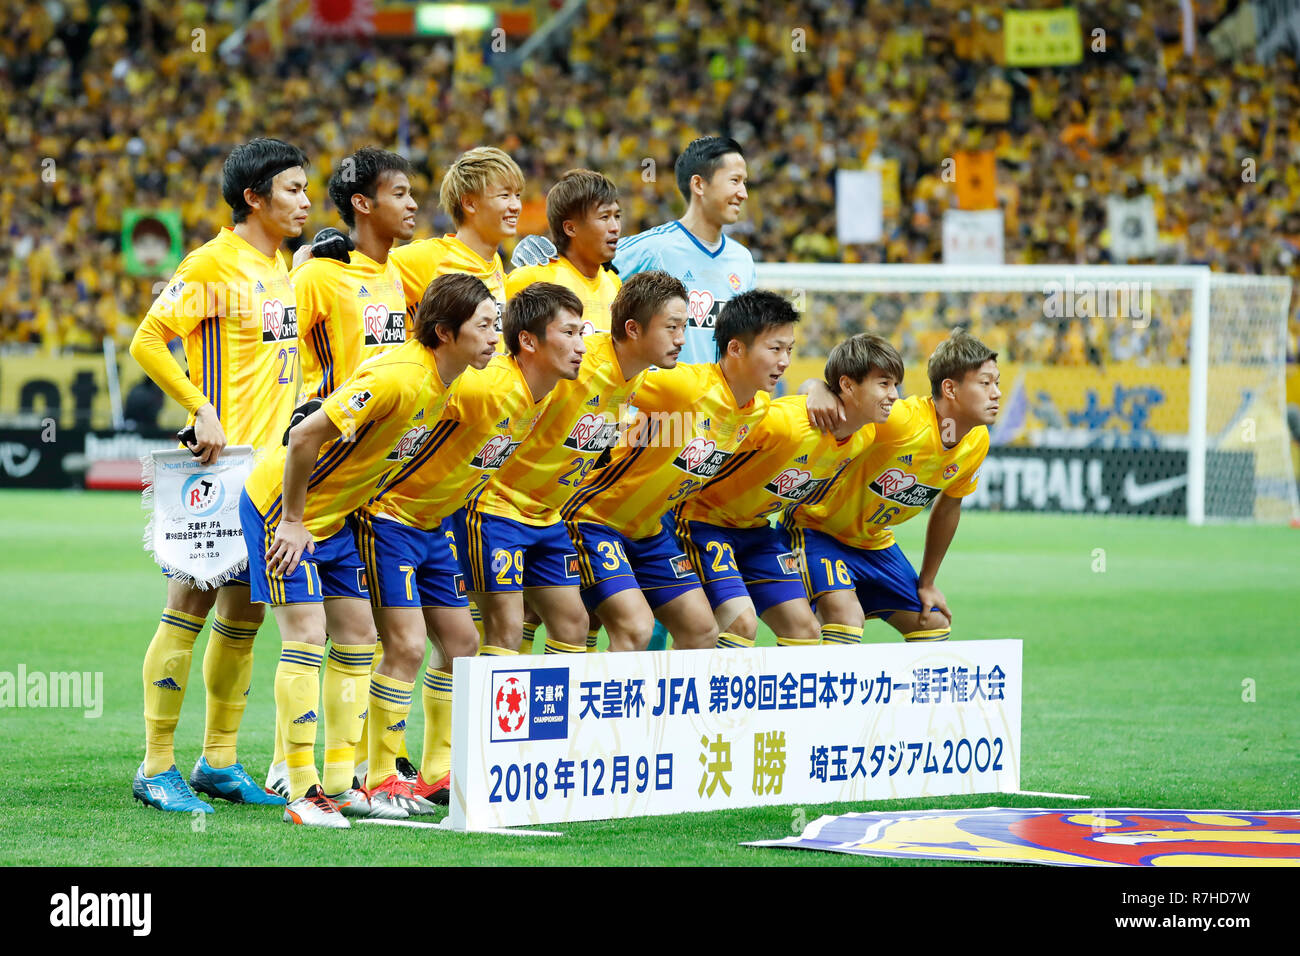 Vegalta Sendai Team Group Line Up High Resolution Stock Photography And Images Alamy